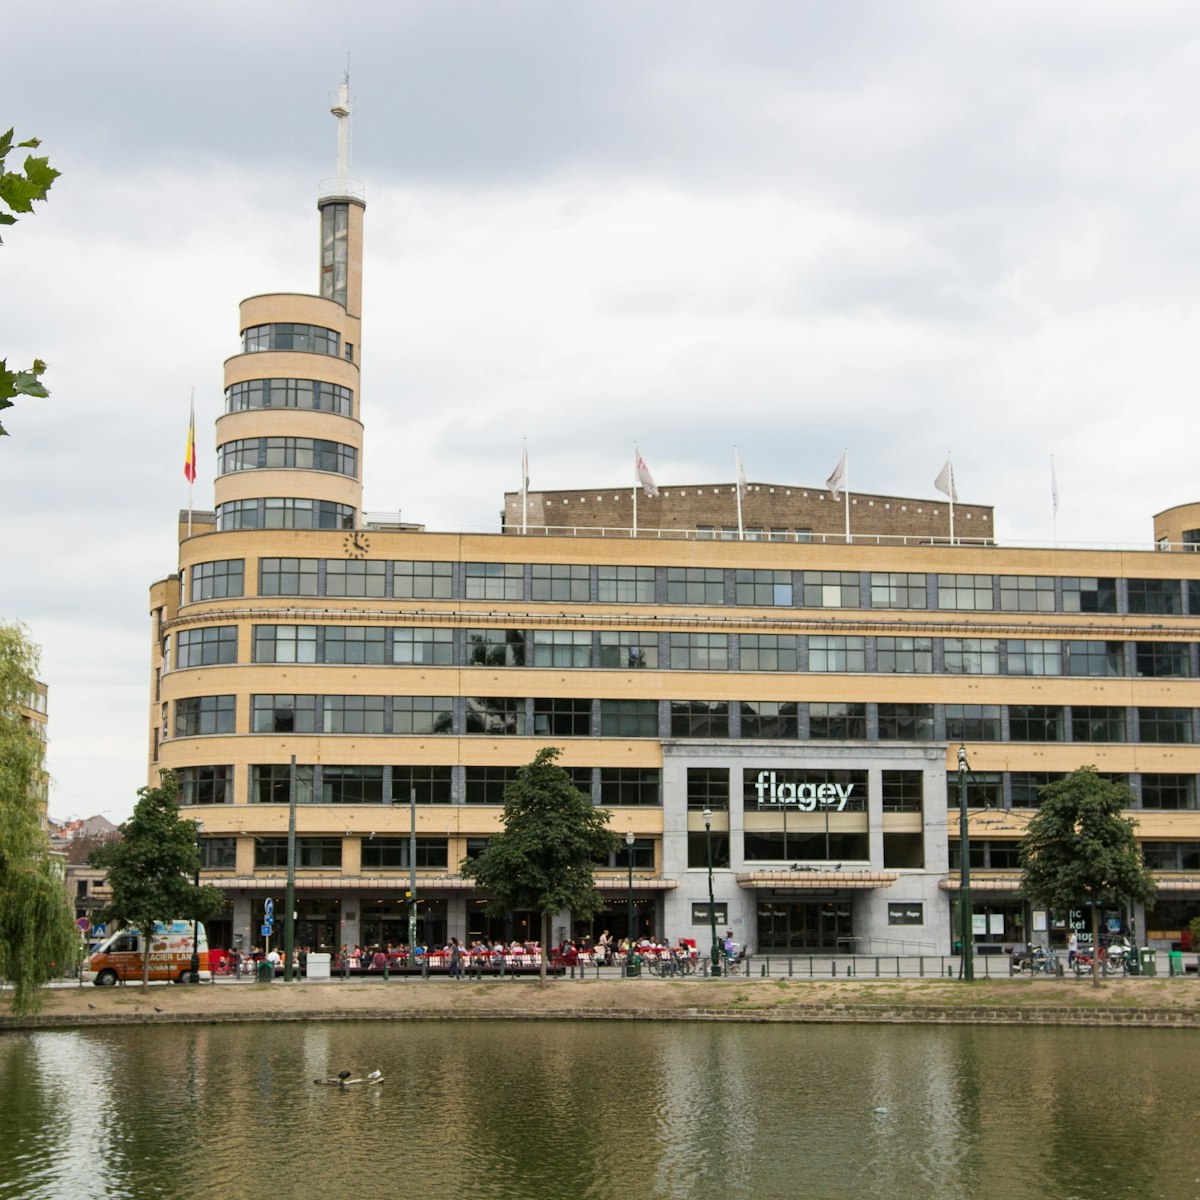 Flagey building from across the pond